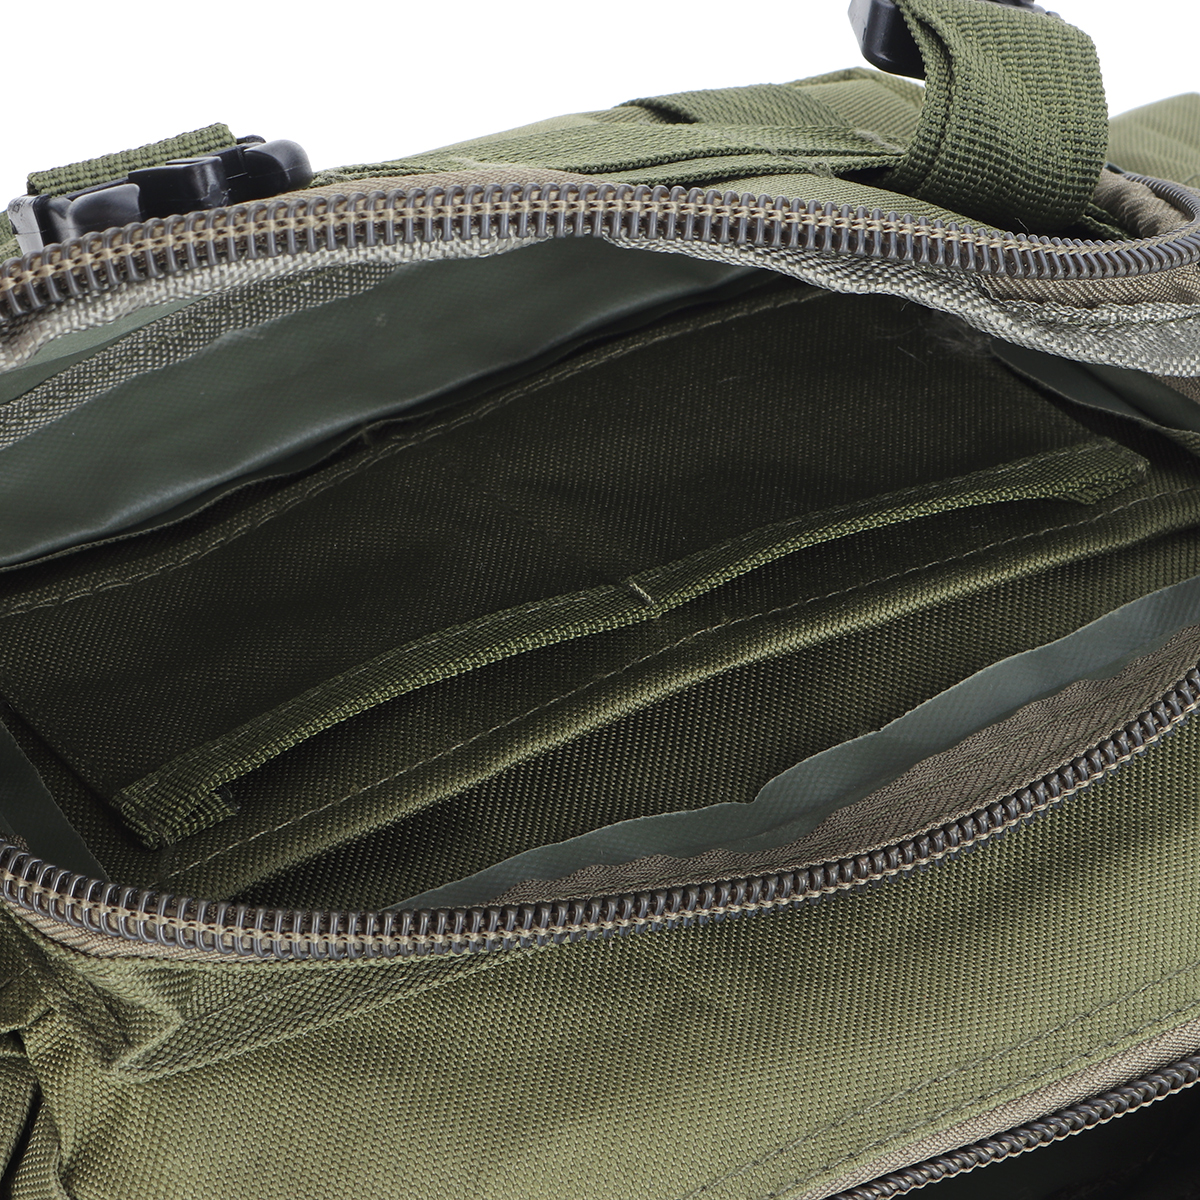 Multifunctional-Outdoor-Sports-Hiking-with-Zippers-Nylon-Oxford-Cloth-Tactical-Shoulder-Bag-Waist-Pa-1825563-23